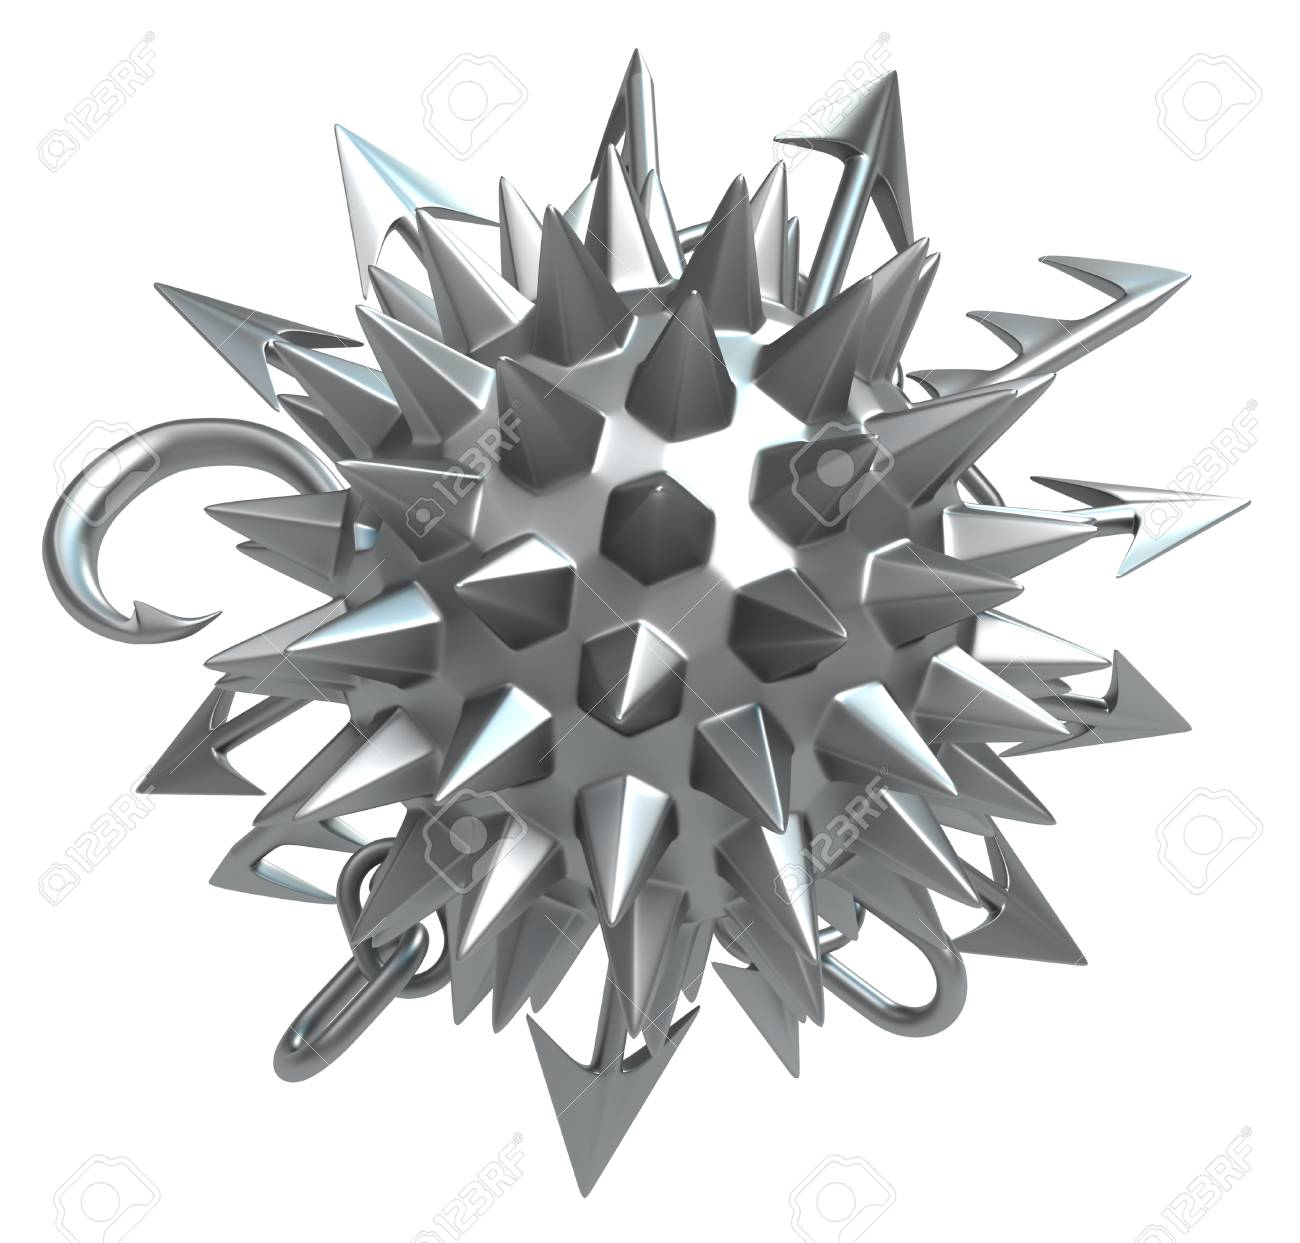 very spiky metal ball with barbs